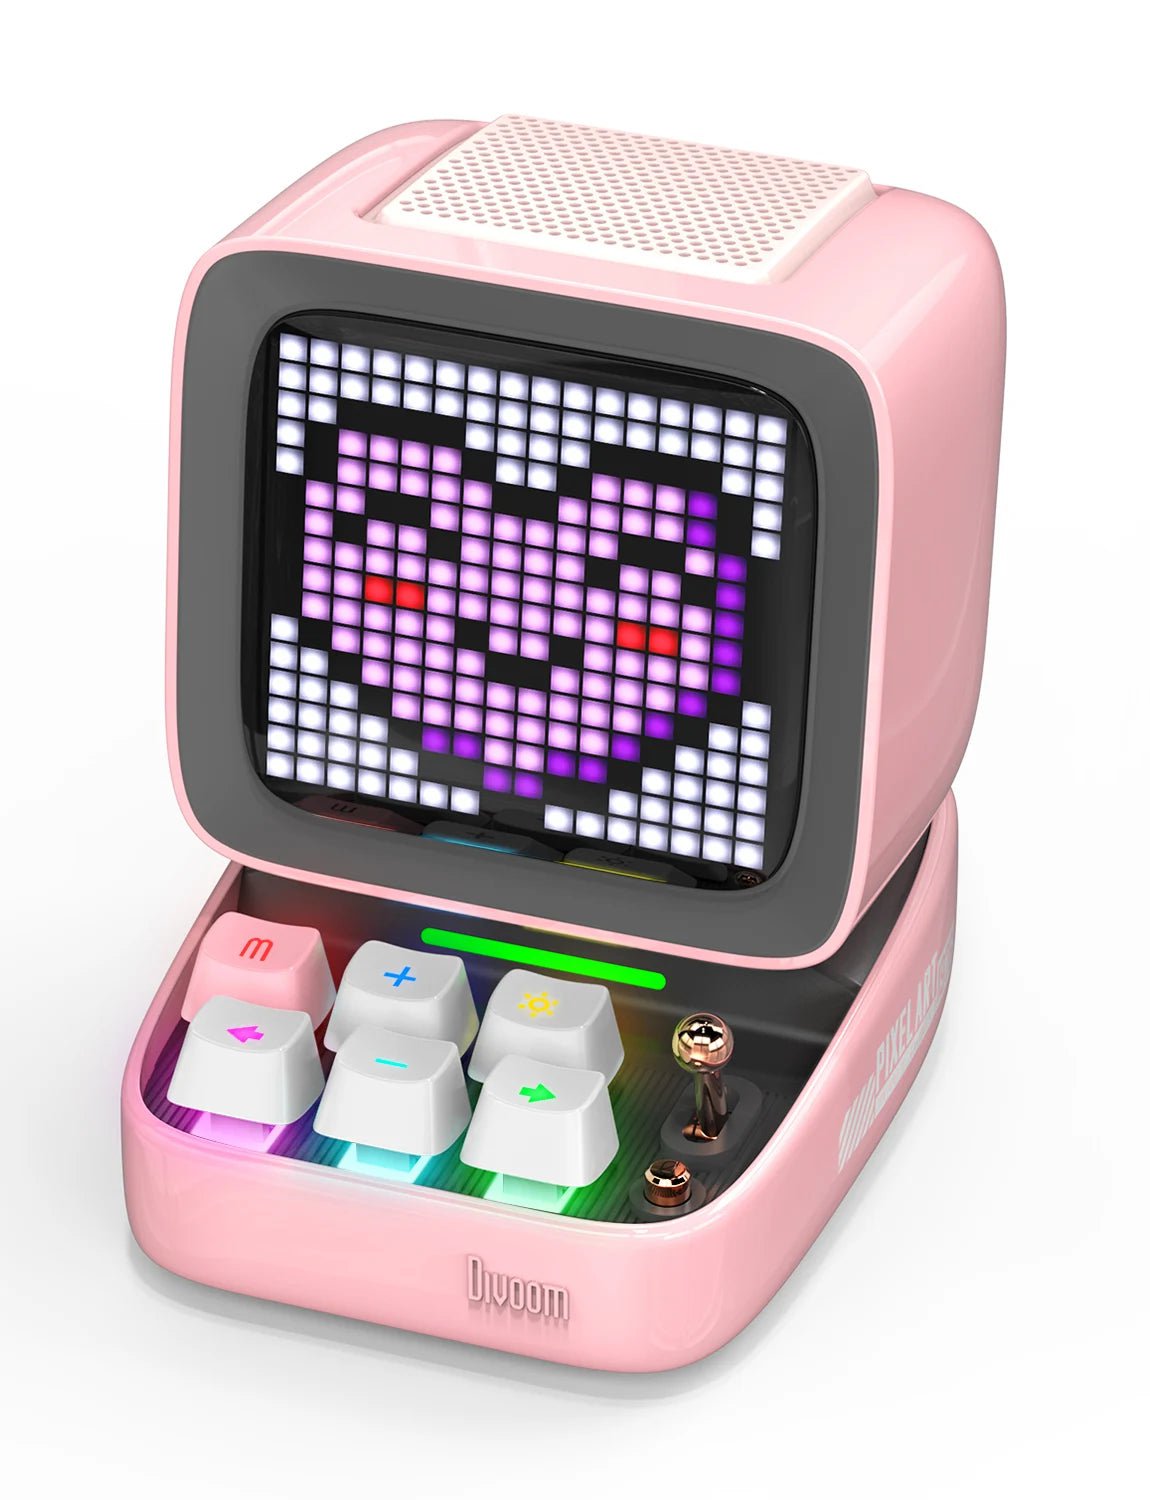 Divoom Ditoo Pixel Art Bluetooth Speaker - Wireless, 15W Output Power, Ideal for Gaming Room Setup with 16x16 LED App-Controlled Front Screen Pink / CHINA